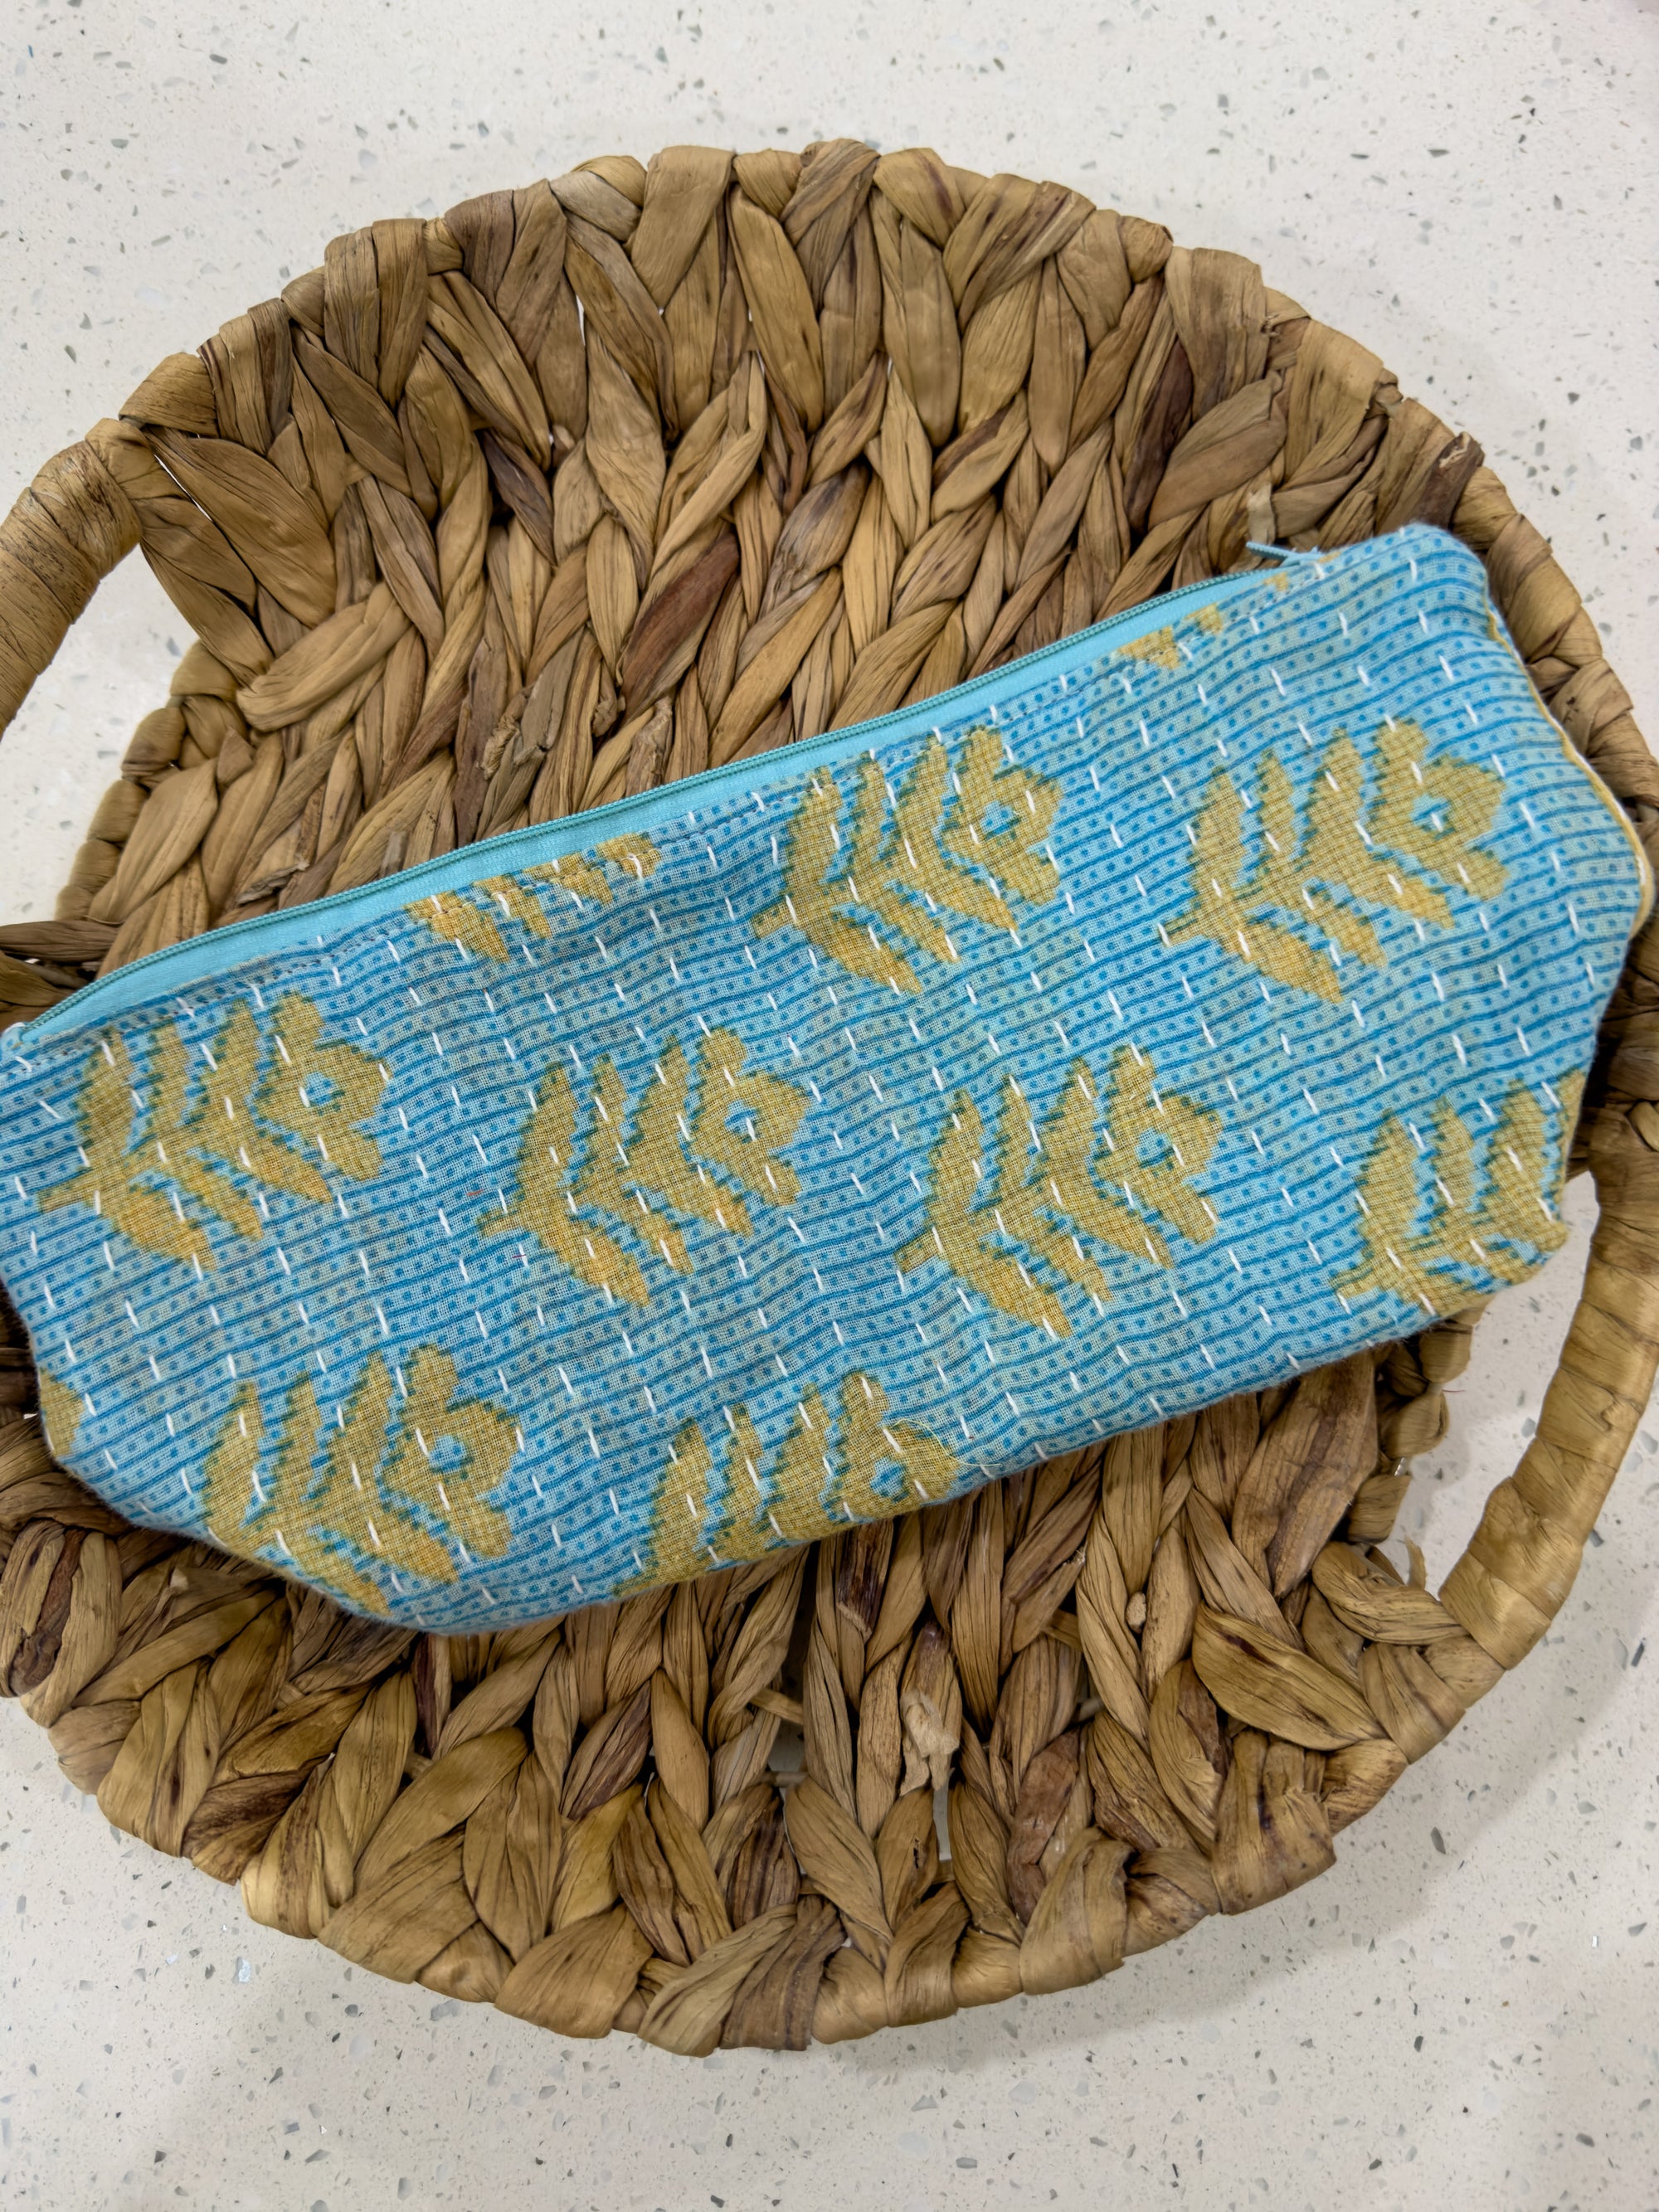 a blue and yellow bag sitting on top of a woven basket